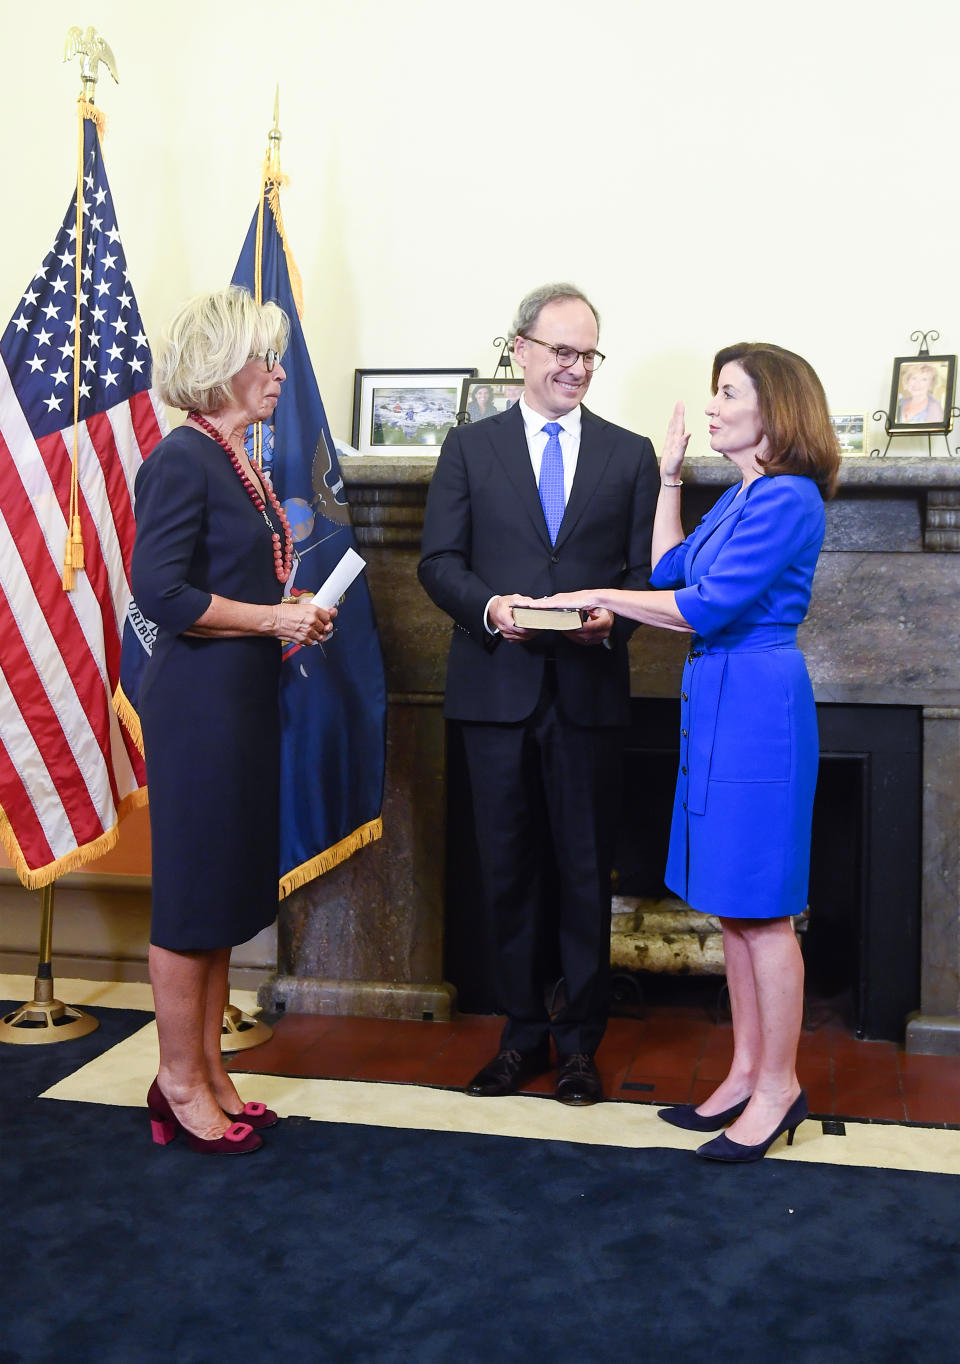 New York Chief Judge Janet DiFiore, left, swears in Kathy Hochul, right, as the first woman to be New York's governor while her husband Bill Hochul holds a bible during a swearing-in ceremony in the Red Room at the state Capitol, early Tuesday, Aug. 24, 2021, in Albany, N.Y. (AP Photo/Hans Pennink, Pool)